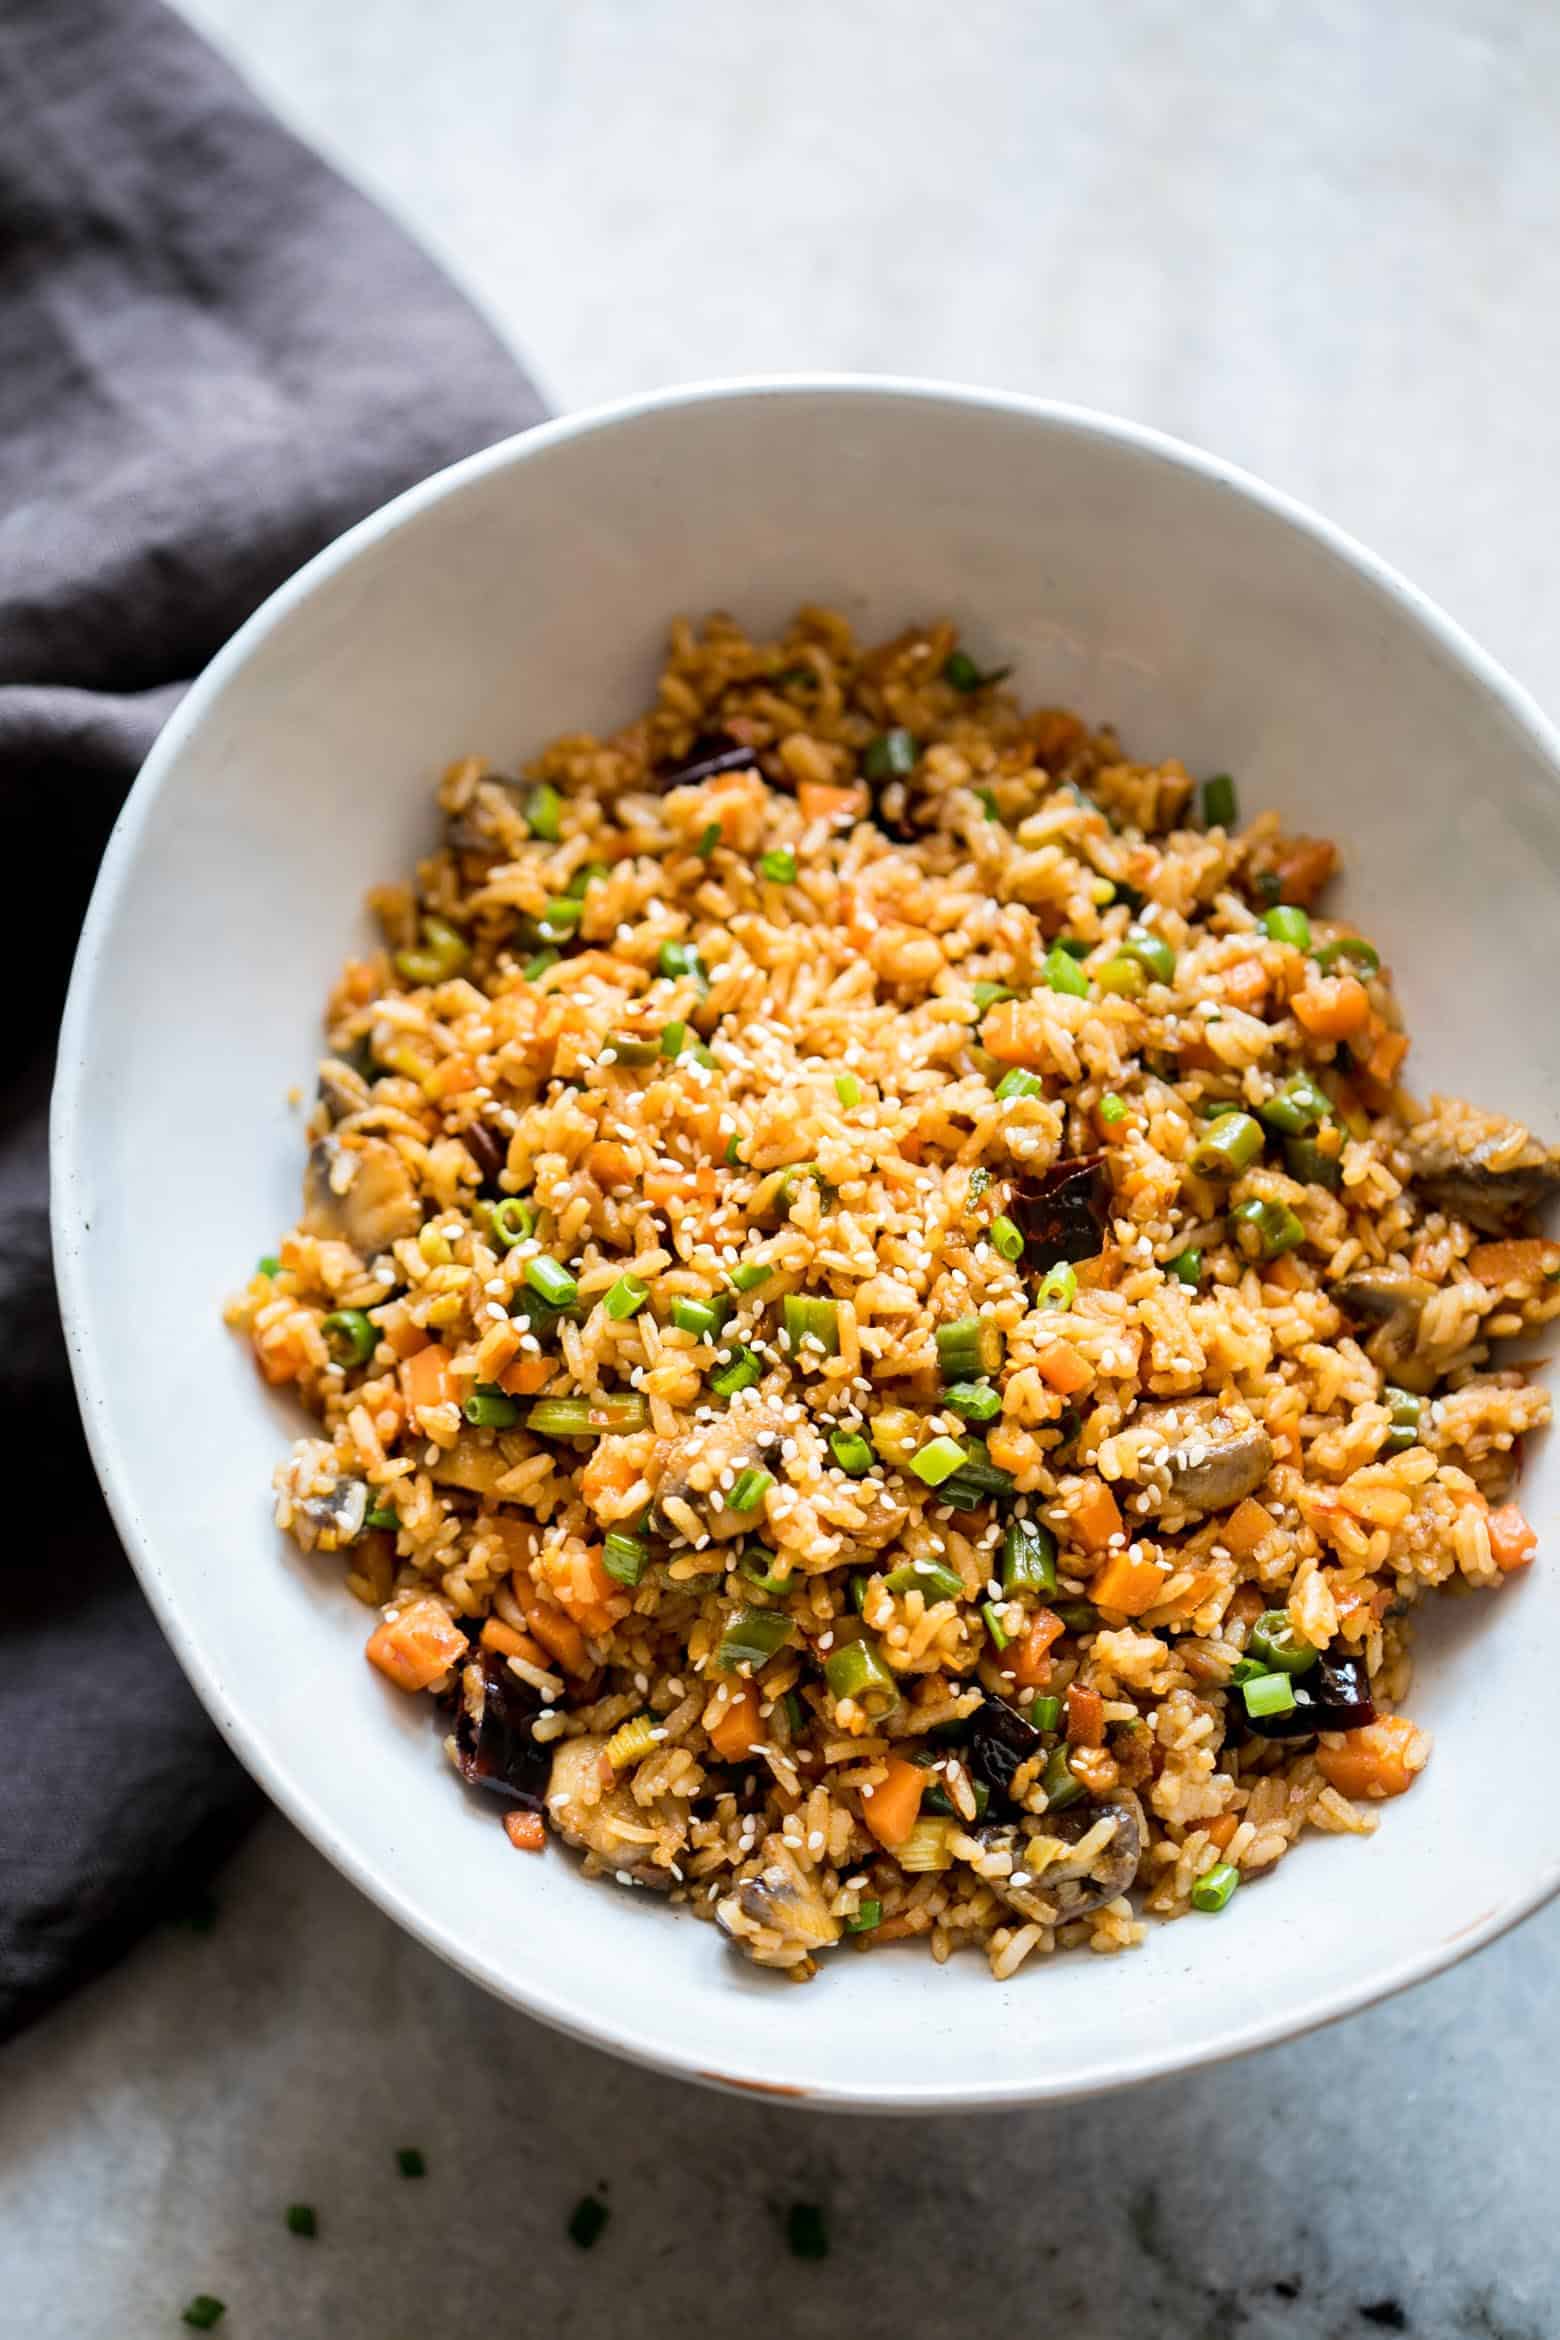 This is the best chinese schezwan fried rice you'll make - loaded with vegetables, spicy and super easy! Made with sichuan sauce, it's the best way to use leftover rice.